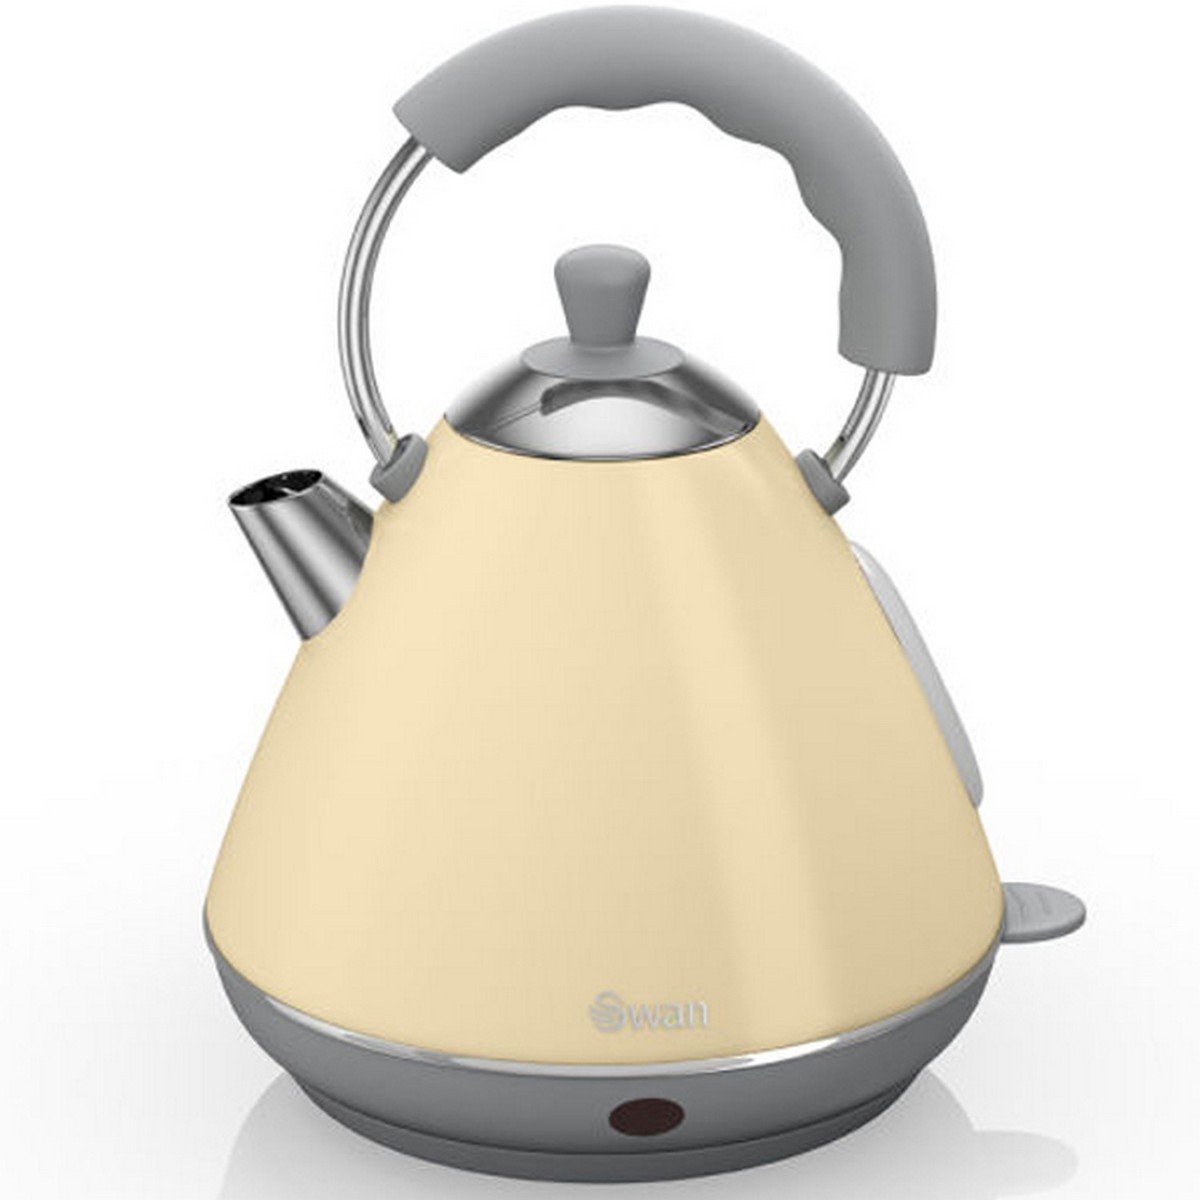 Swan Pyramid Kettle SK261030 2 Liter Assorted Color 1 Piece